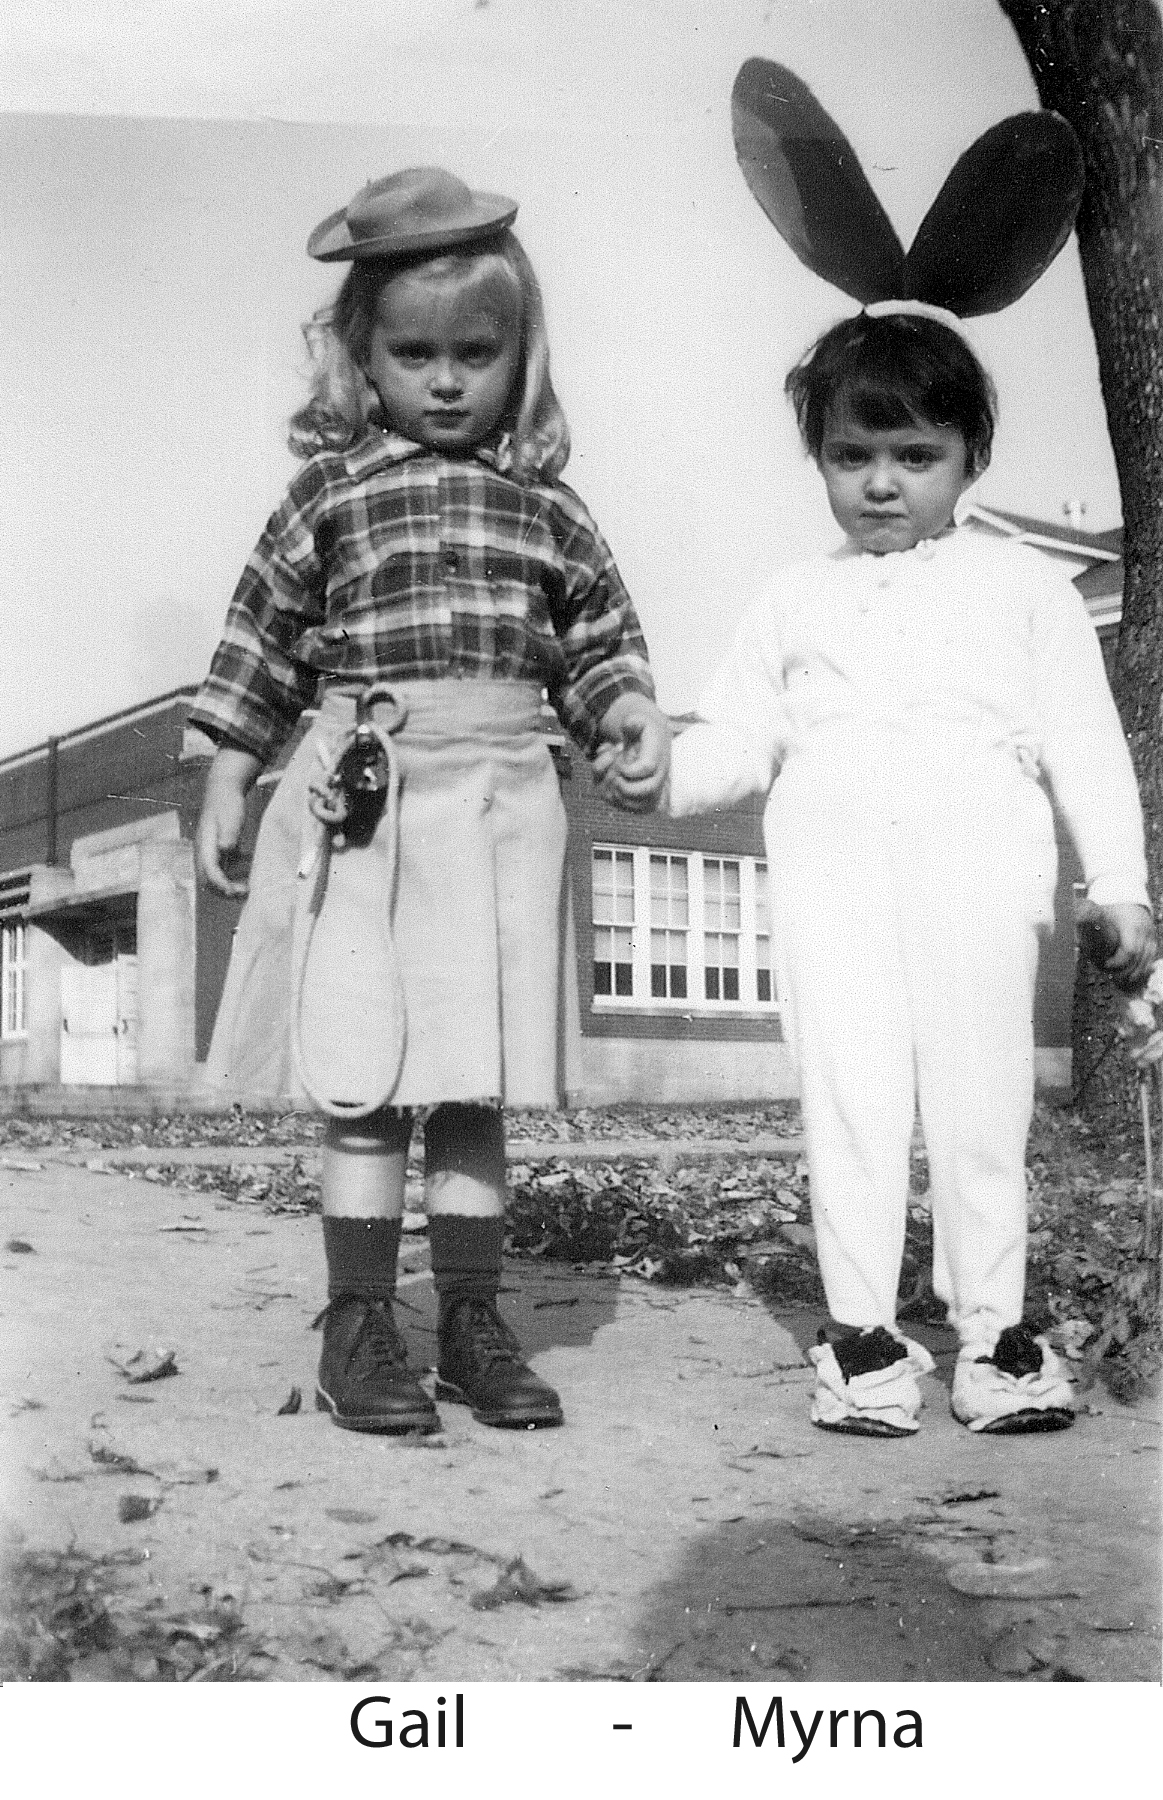 Gail Paton and her friend Myrna Moericke standing and holding hands